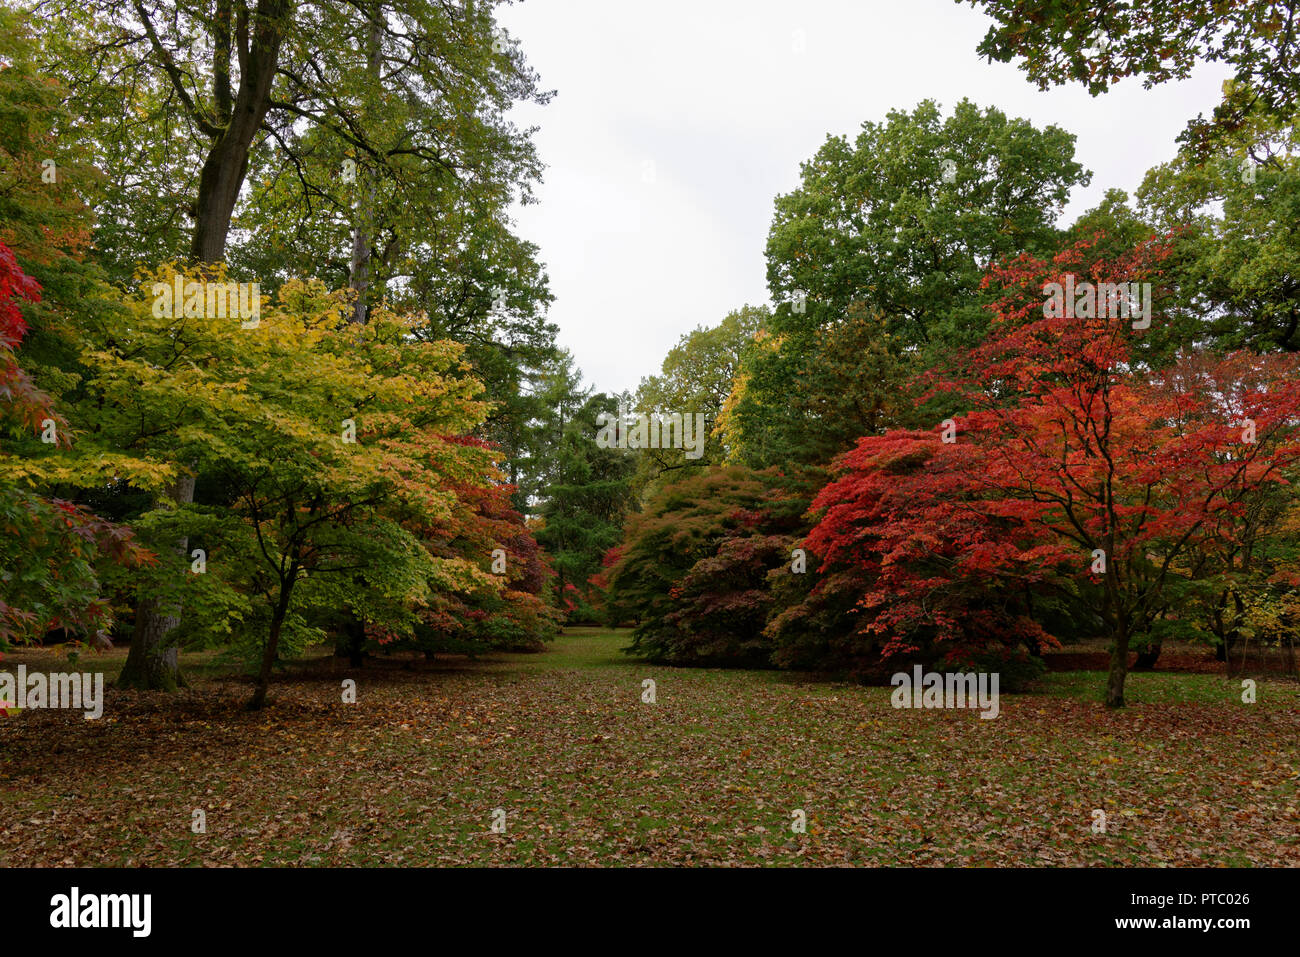 Autumn (Fall) colours at Westonbirt arboretum in the Cotswolds an area of outstanding natural beauty in the South Western part of the United Kingdom Stock Photo